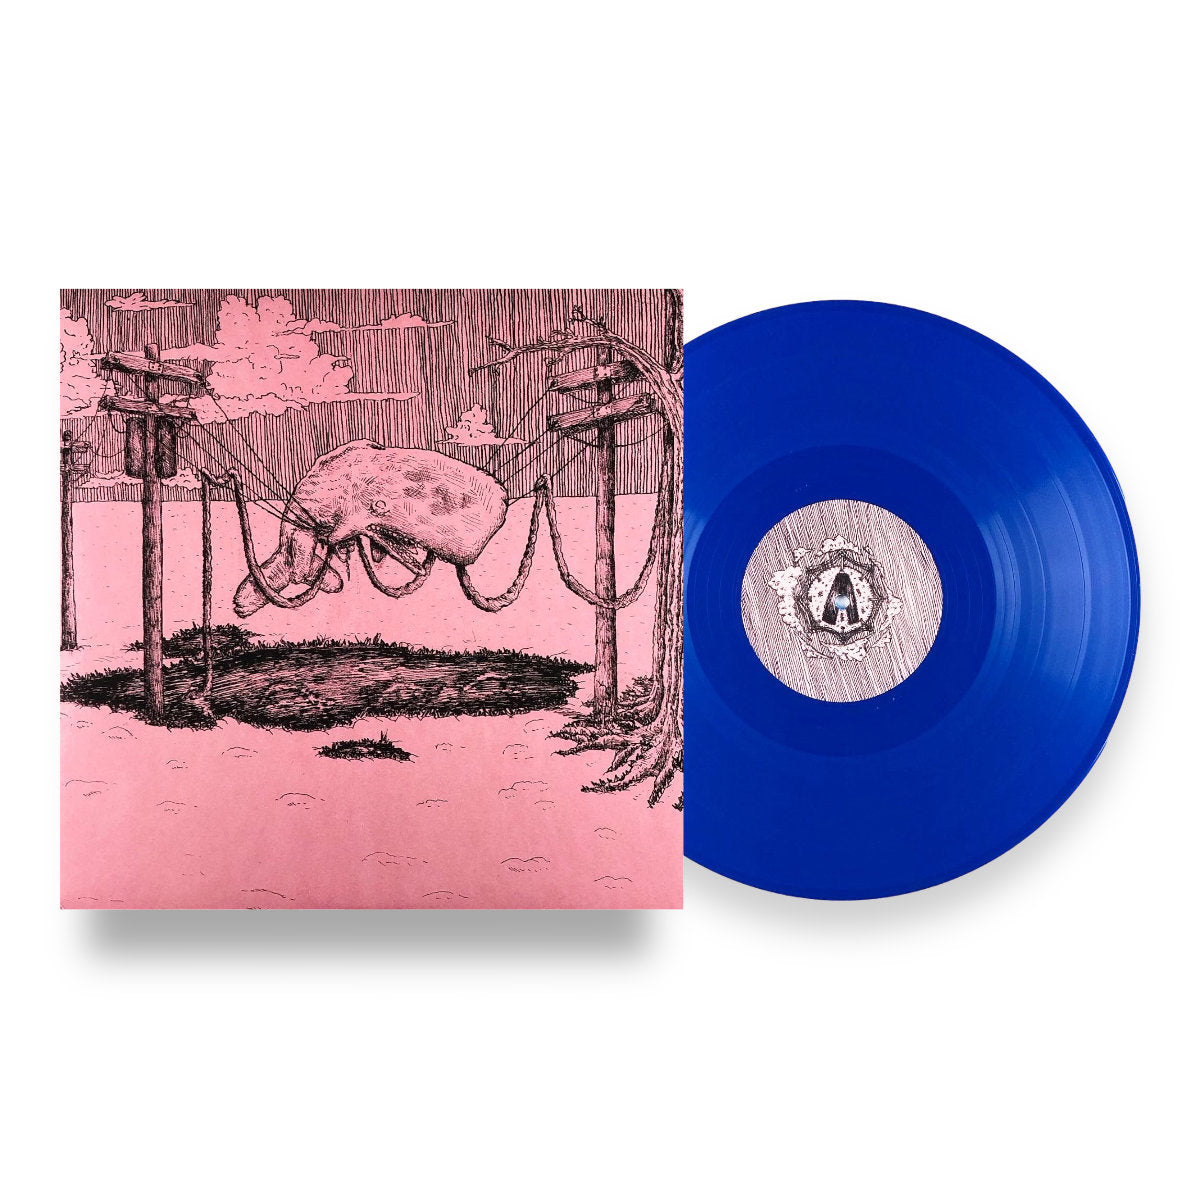 Home Is Where - The Whaler: Limited Blue Vinyl LP